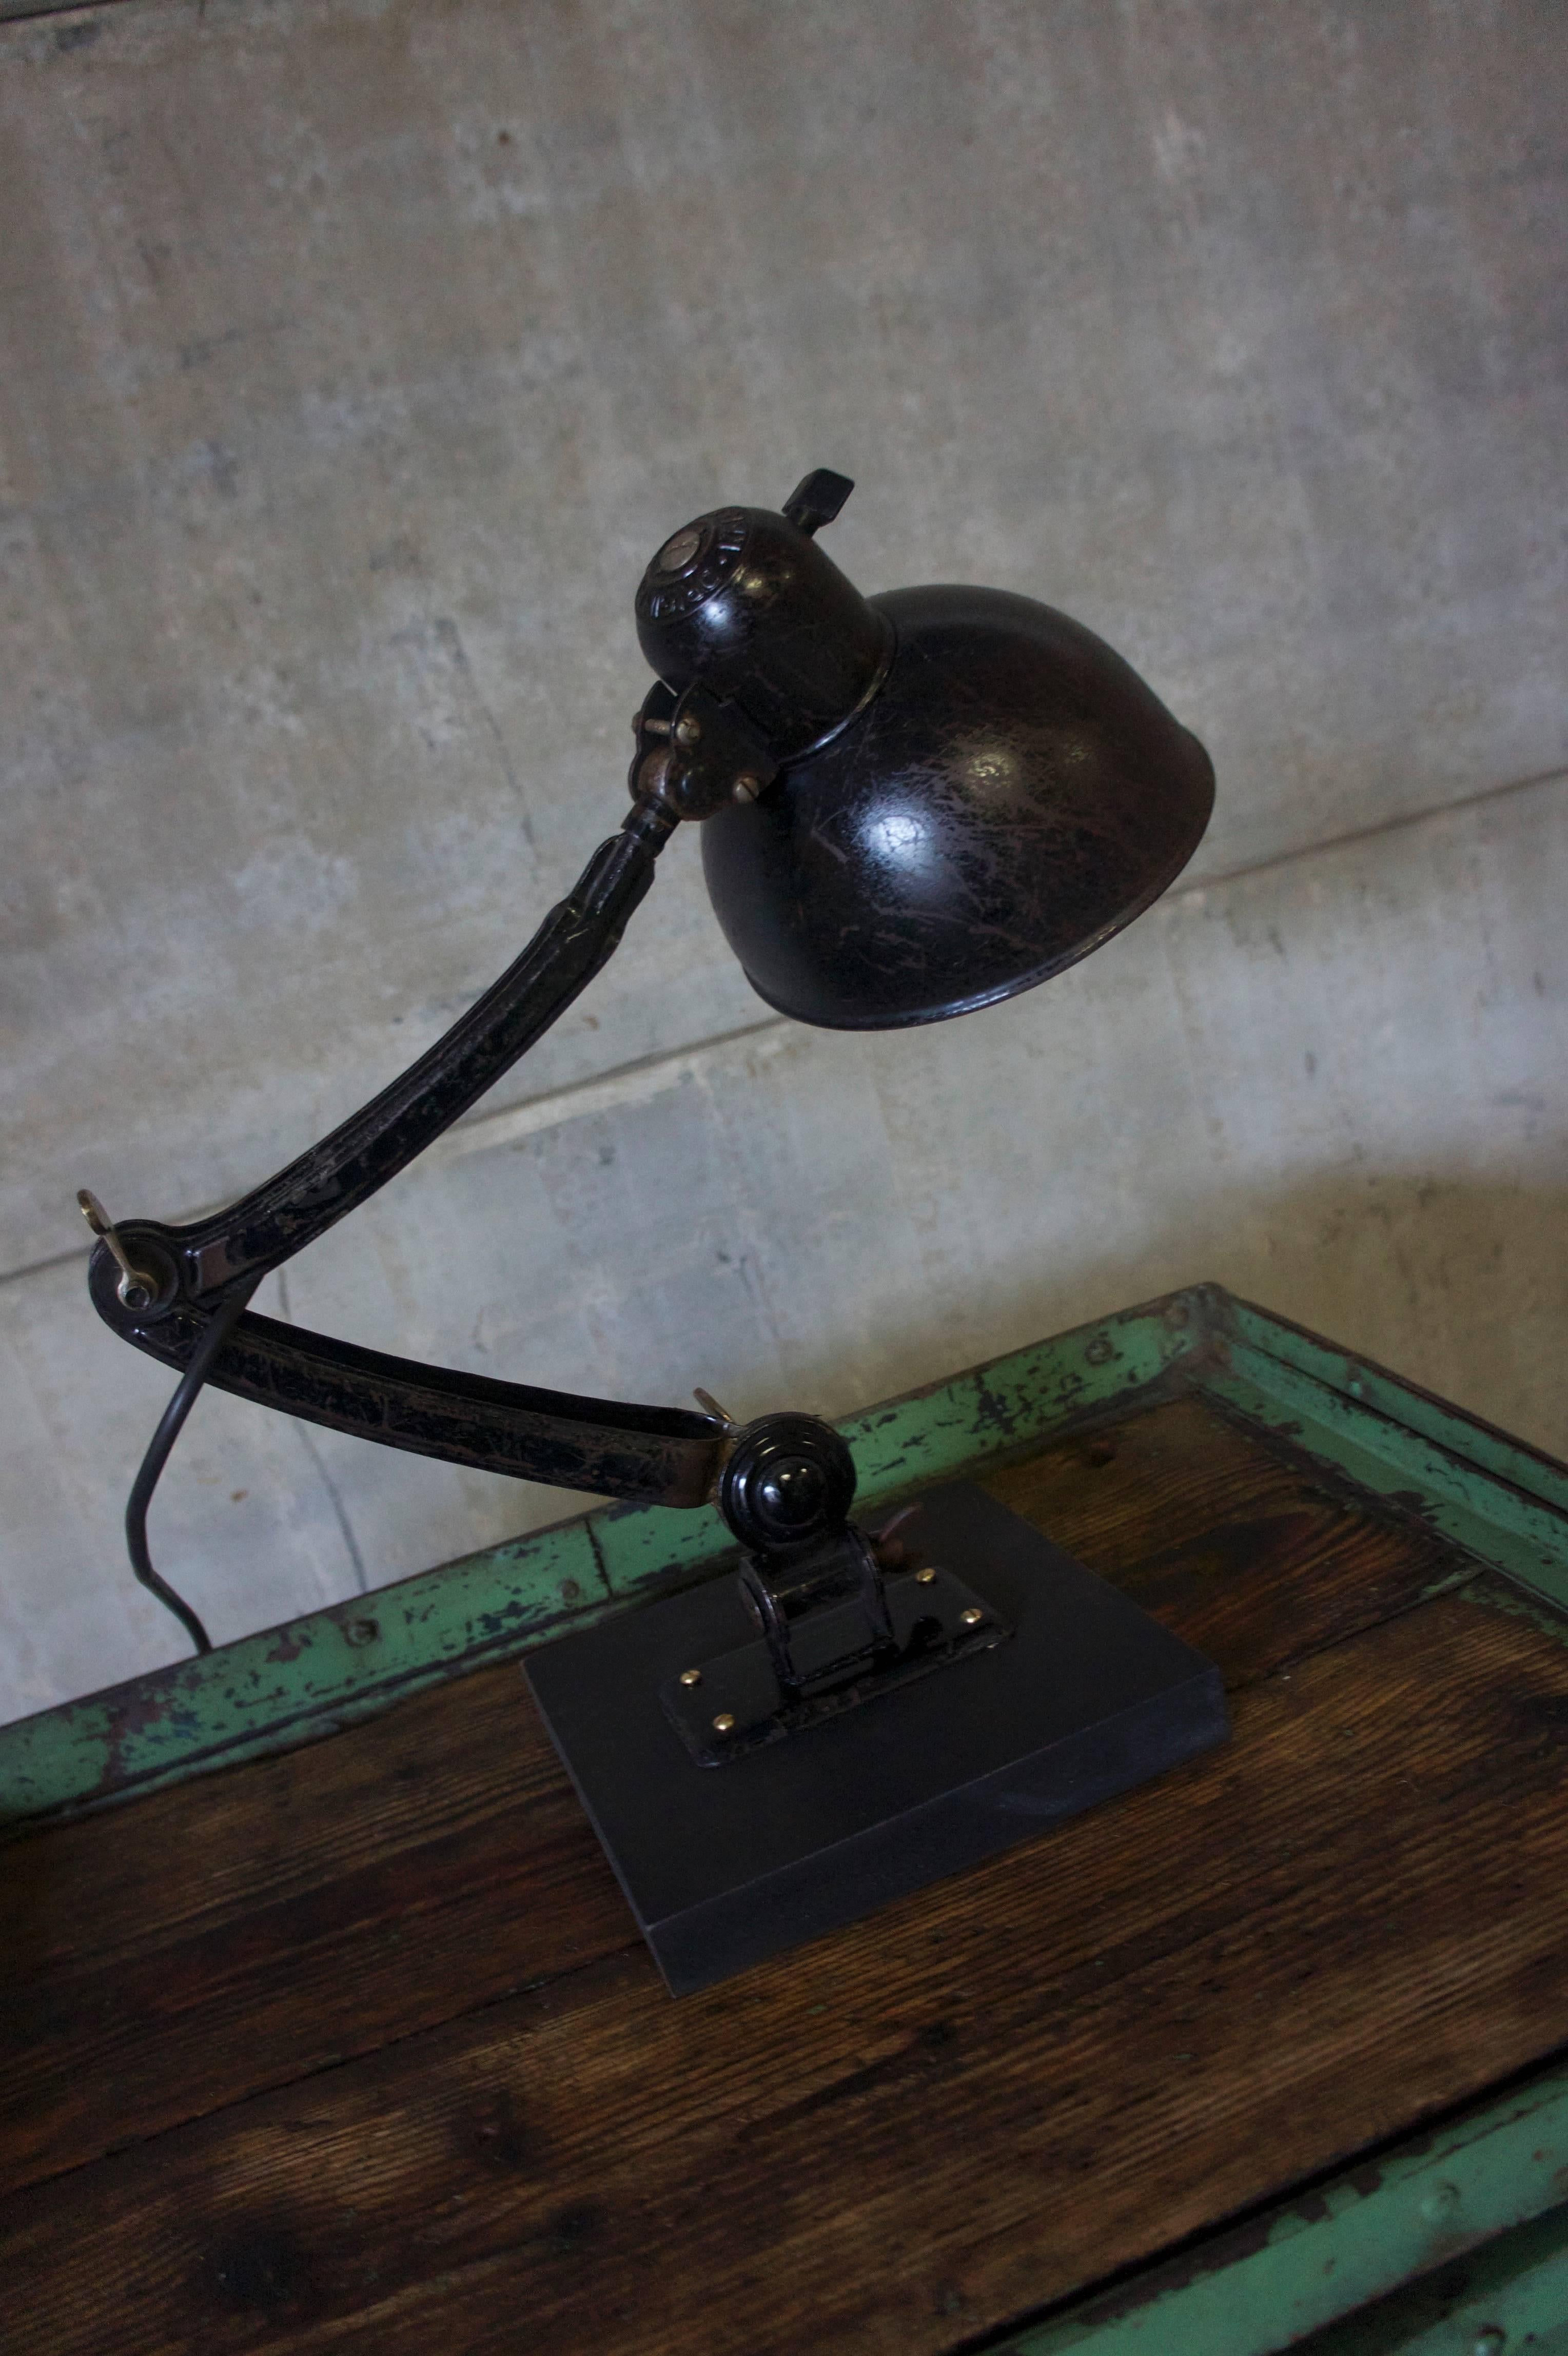 This desk lamp was manufactured by Kaiser Idell during the 1940s model 6716. It is made from metal, with a black lampshade. The lamp has been recently been restored and rewired, and is in a good vintage condition.